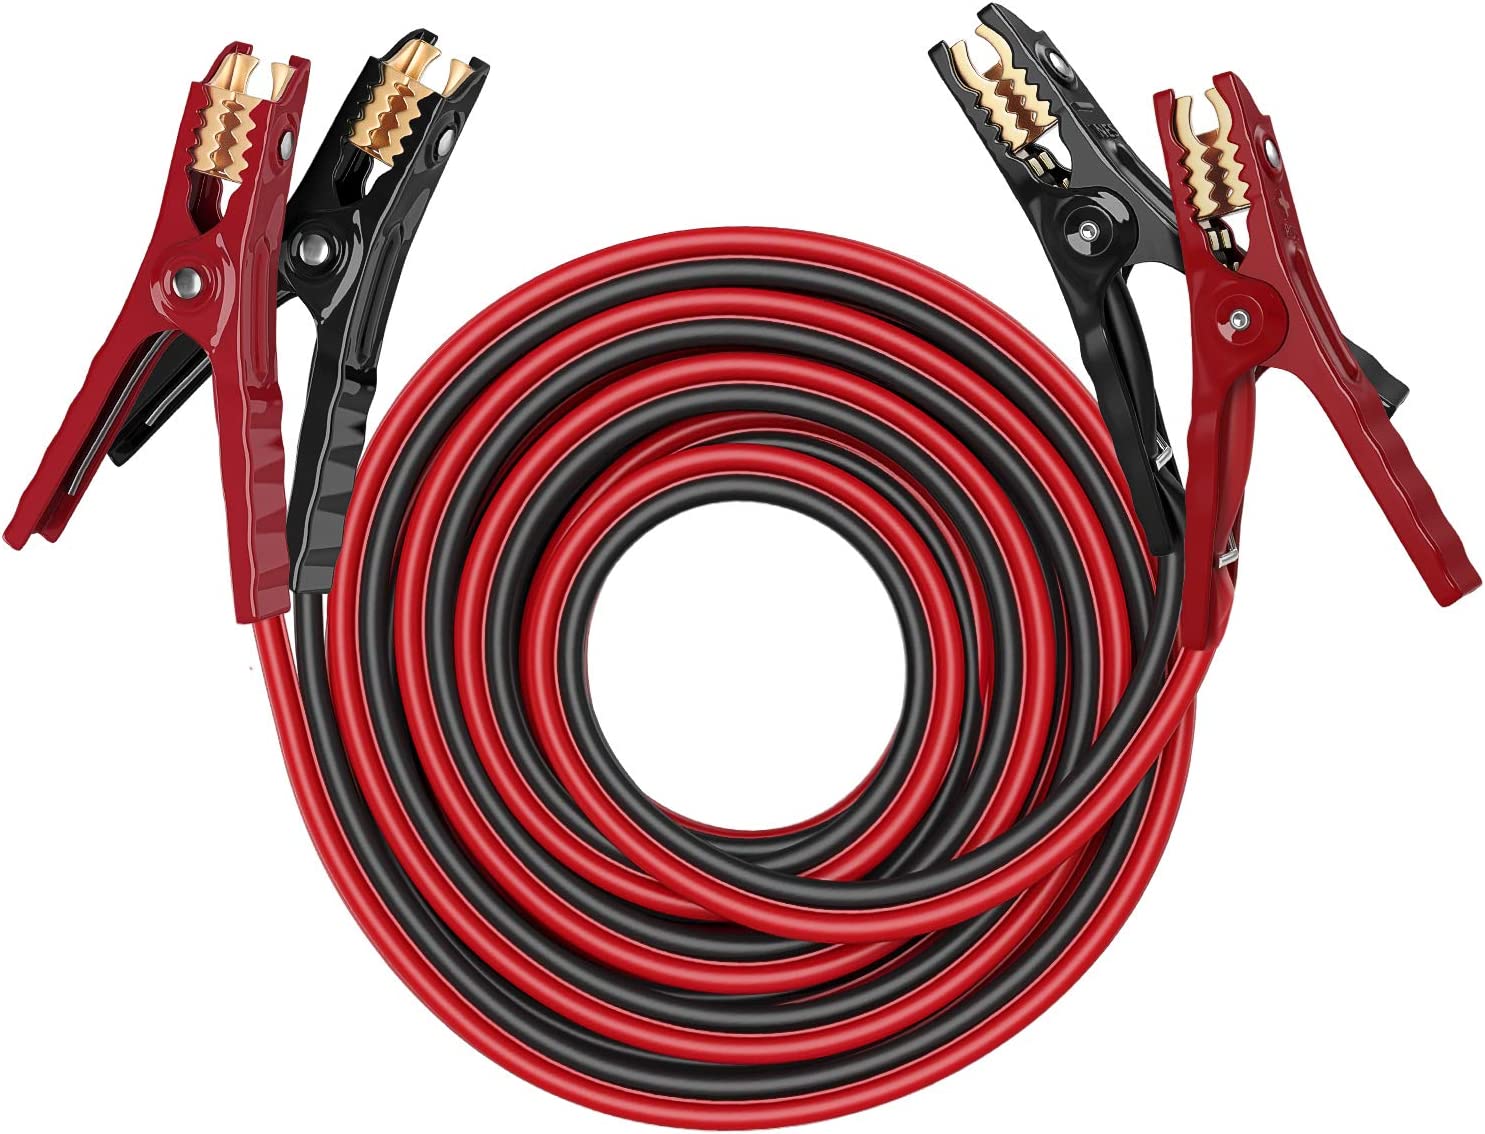 THIKPO G420 Heavy Duty Jumper Cables, Booster Cables [...]